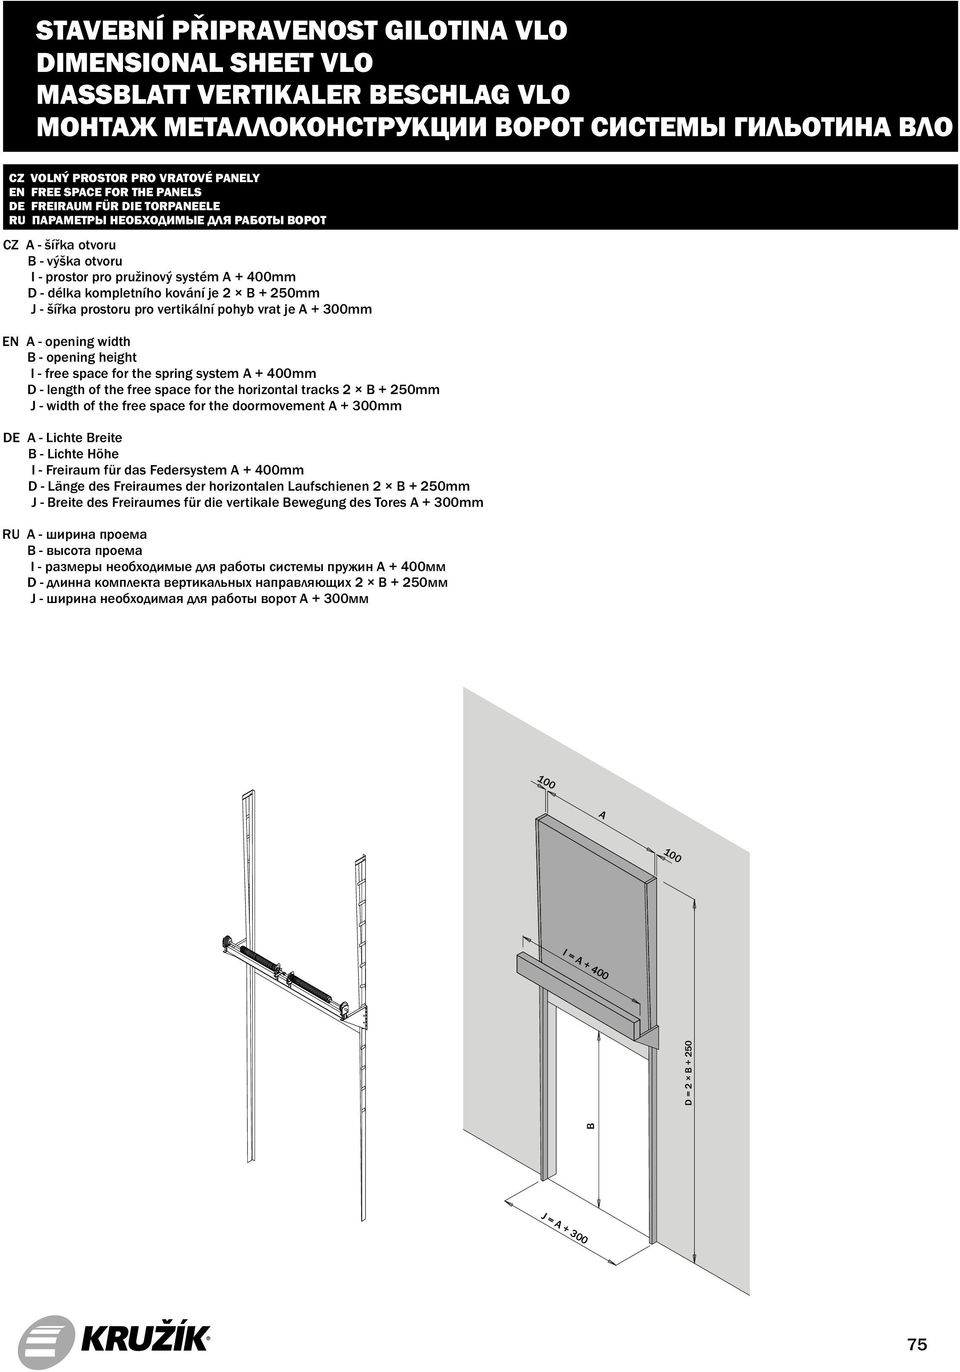 system A + 400mm D - length of the free space for the horizontal tracks 2 B + 250mm J - width of the free space for the doormovement A + 300mm DE A - Lichte Breite B - Lichte Höhe I - Freiraum für